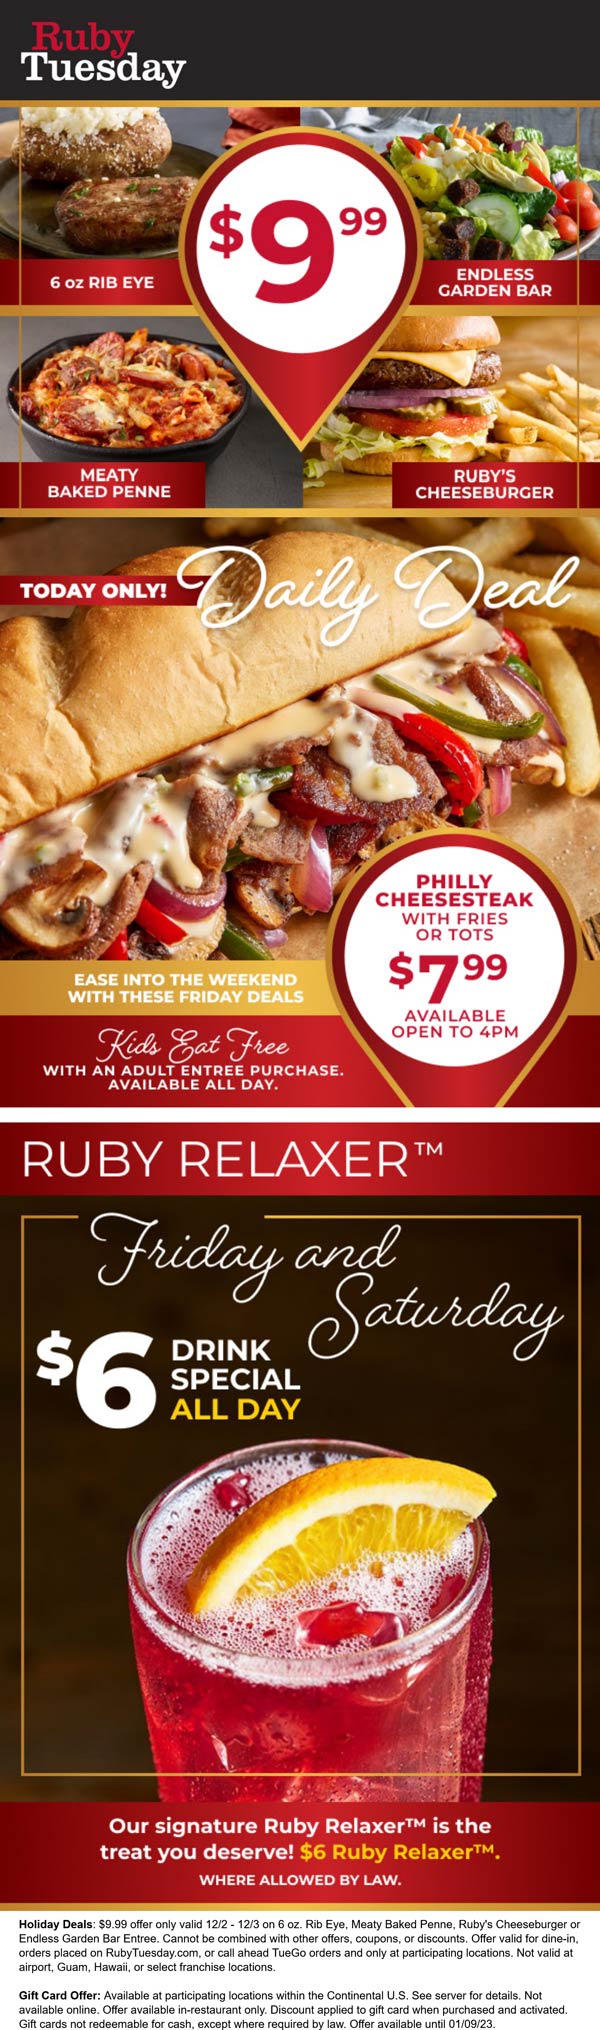 Ruby Tuesday restaurants Coupon  Philly cheesesteak + fries = $8 today at Ruby Tuesday #rubytuesday 